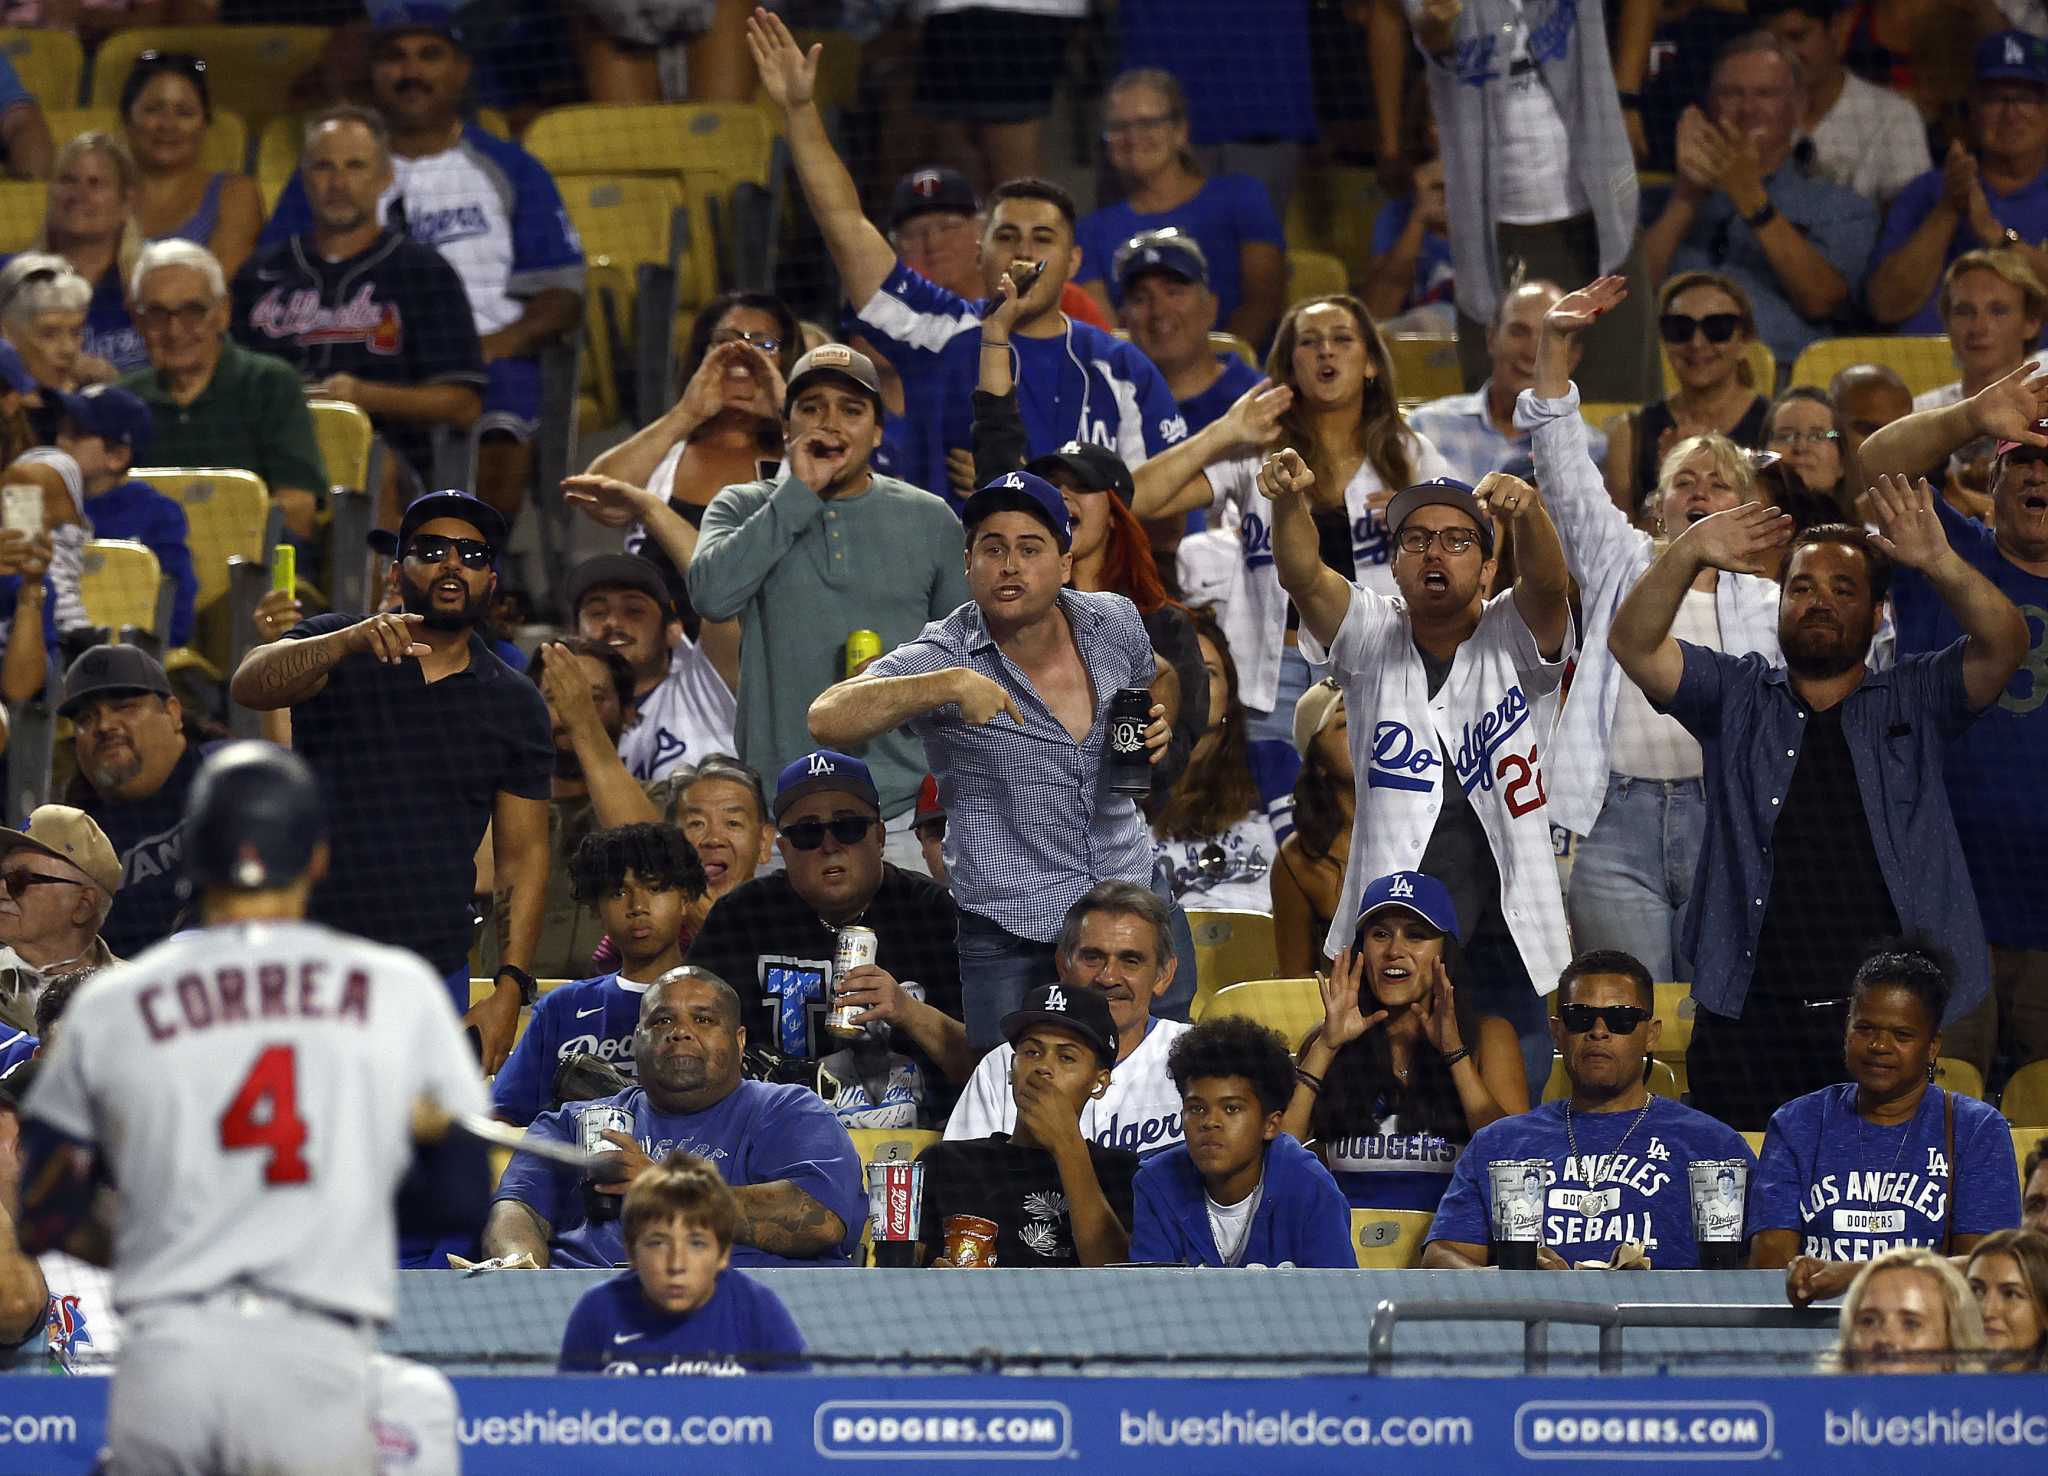 Carlos Correa booed by Dodgers fans even playing for Twins